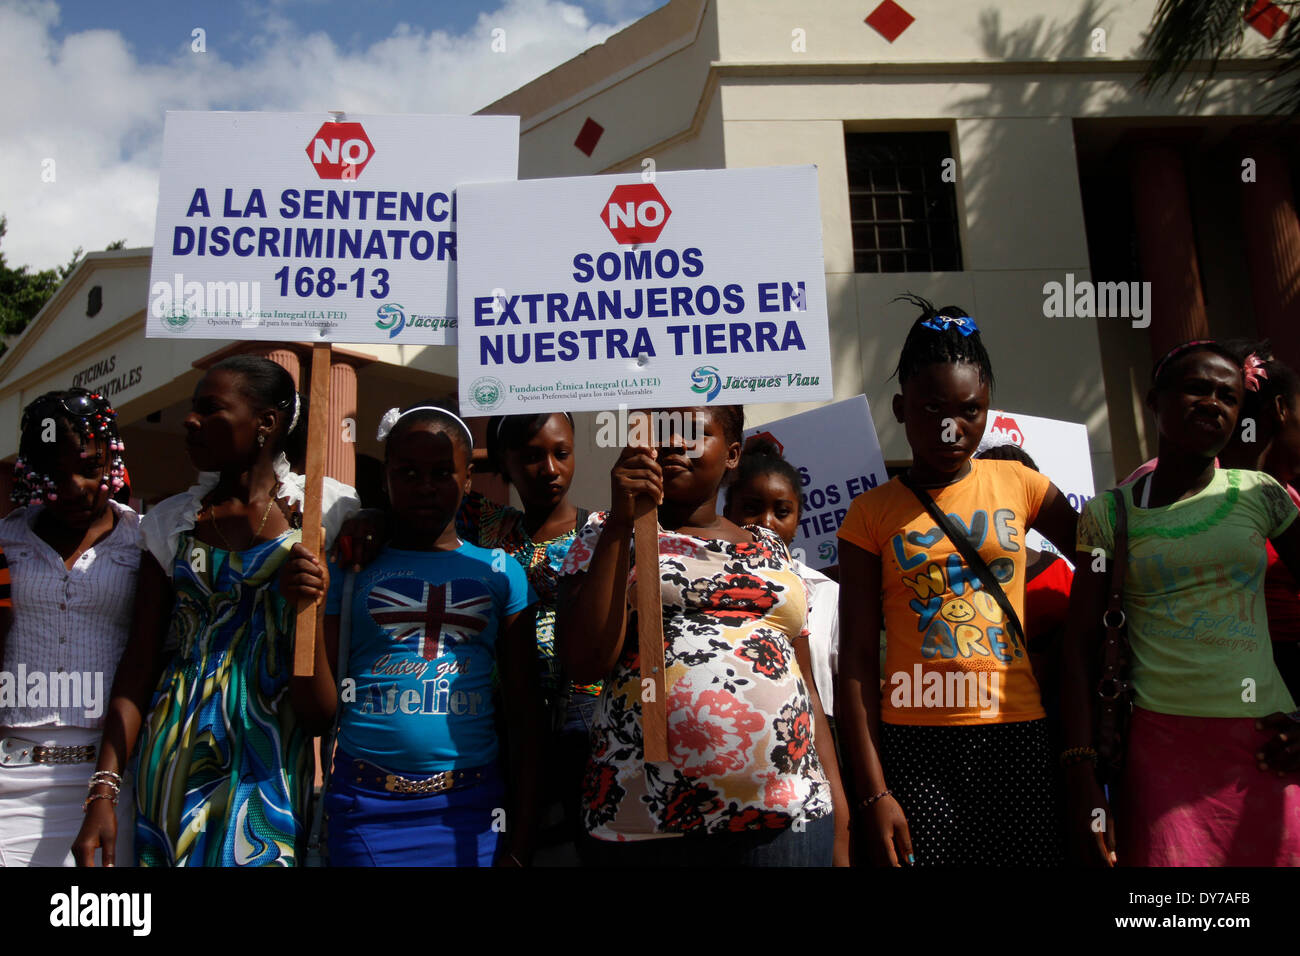 (140408) -- SANTO DOMINGO, April 8, 2014 (Xinhua) -- Dominican residents of Haitian descent hold banners during a protest outside National Palace, in Santo Domingo city, Dominican Republic, on April 8, 2014. A commission of Dominican Movement for Right, handed a letter to the executive branch demanding Dominican President Danilo Medina to present as soon as possible to the National Congress a Law of Recognition. The law fully restore the rights affecting some 200, 00 Dominicans of Haitian descent who have been denationalized by the judgement 168-13, issued by the Constitutional Court (CC), add Stock Photo